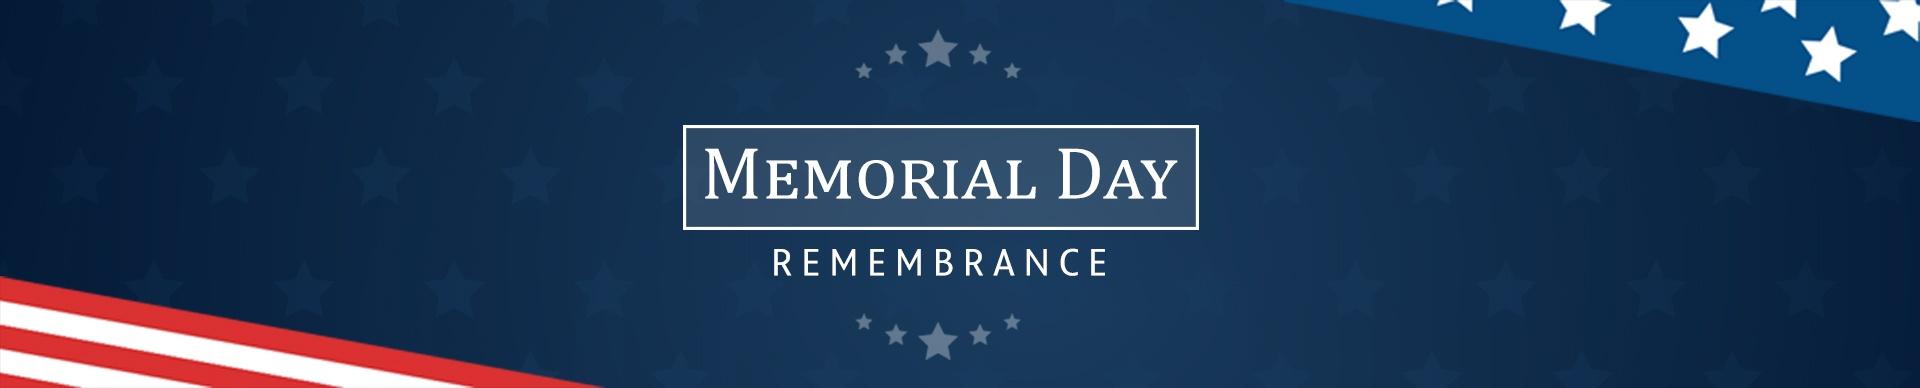 City of Peoria's Memorial Day Remembrance